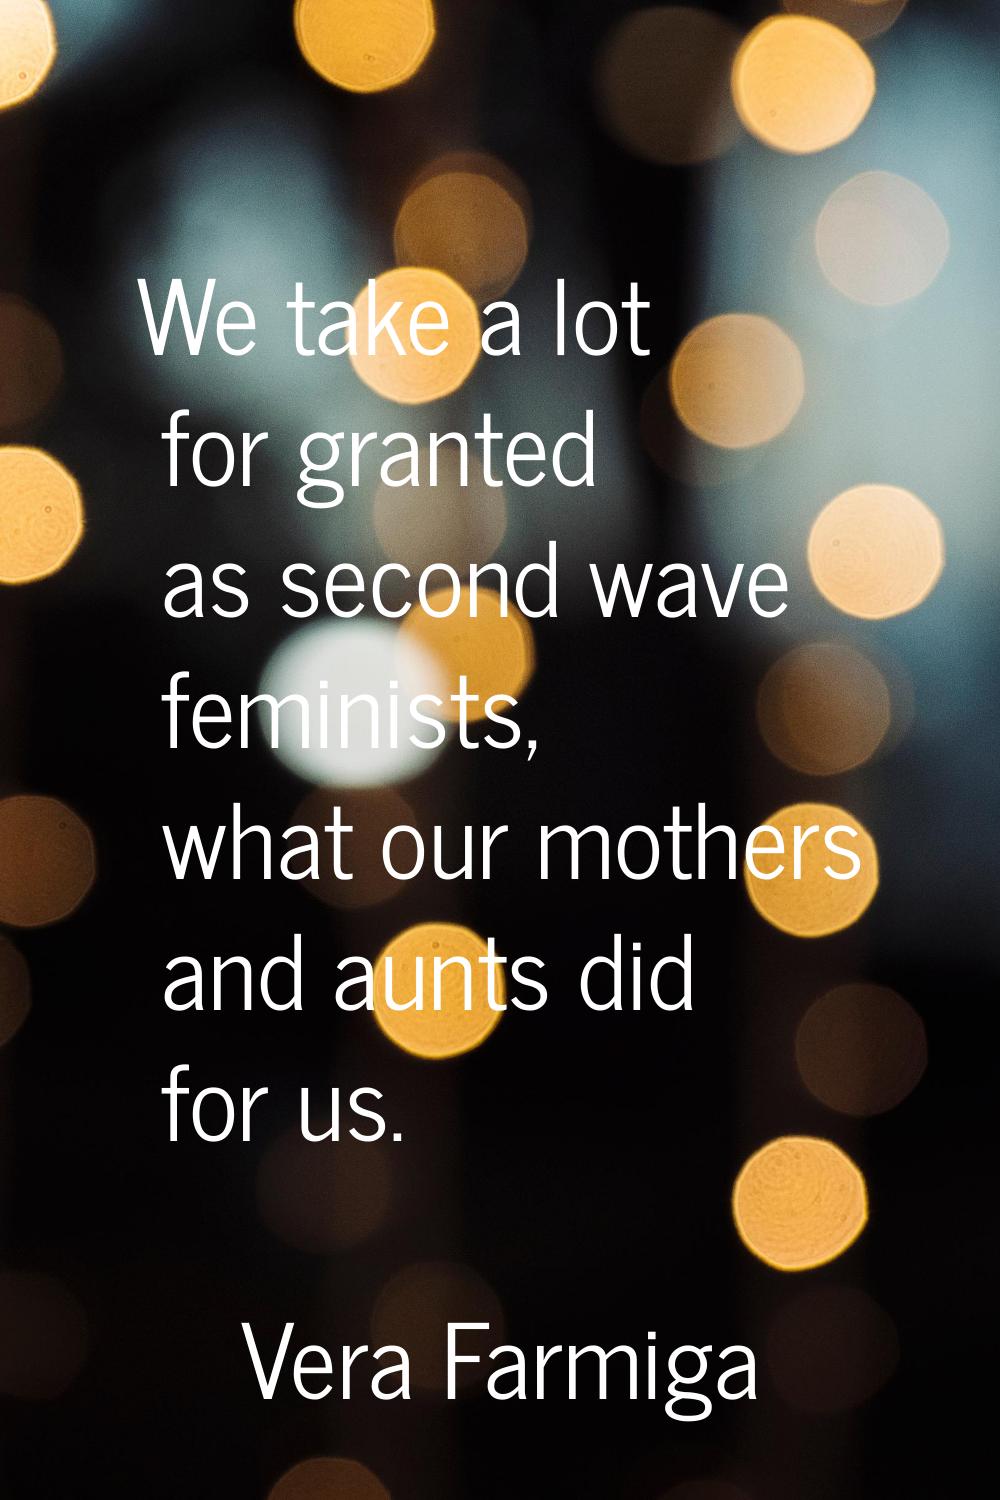 We take a lot for granted as second wave feminists, what our mothers and aunts did for us.